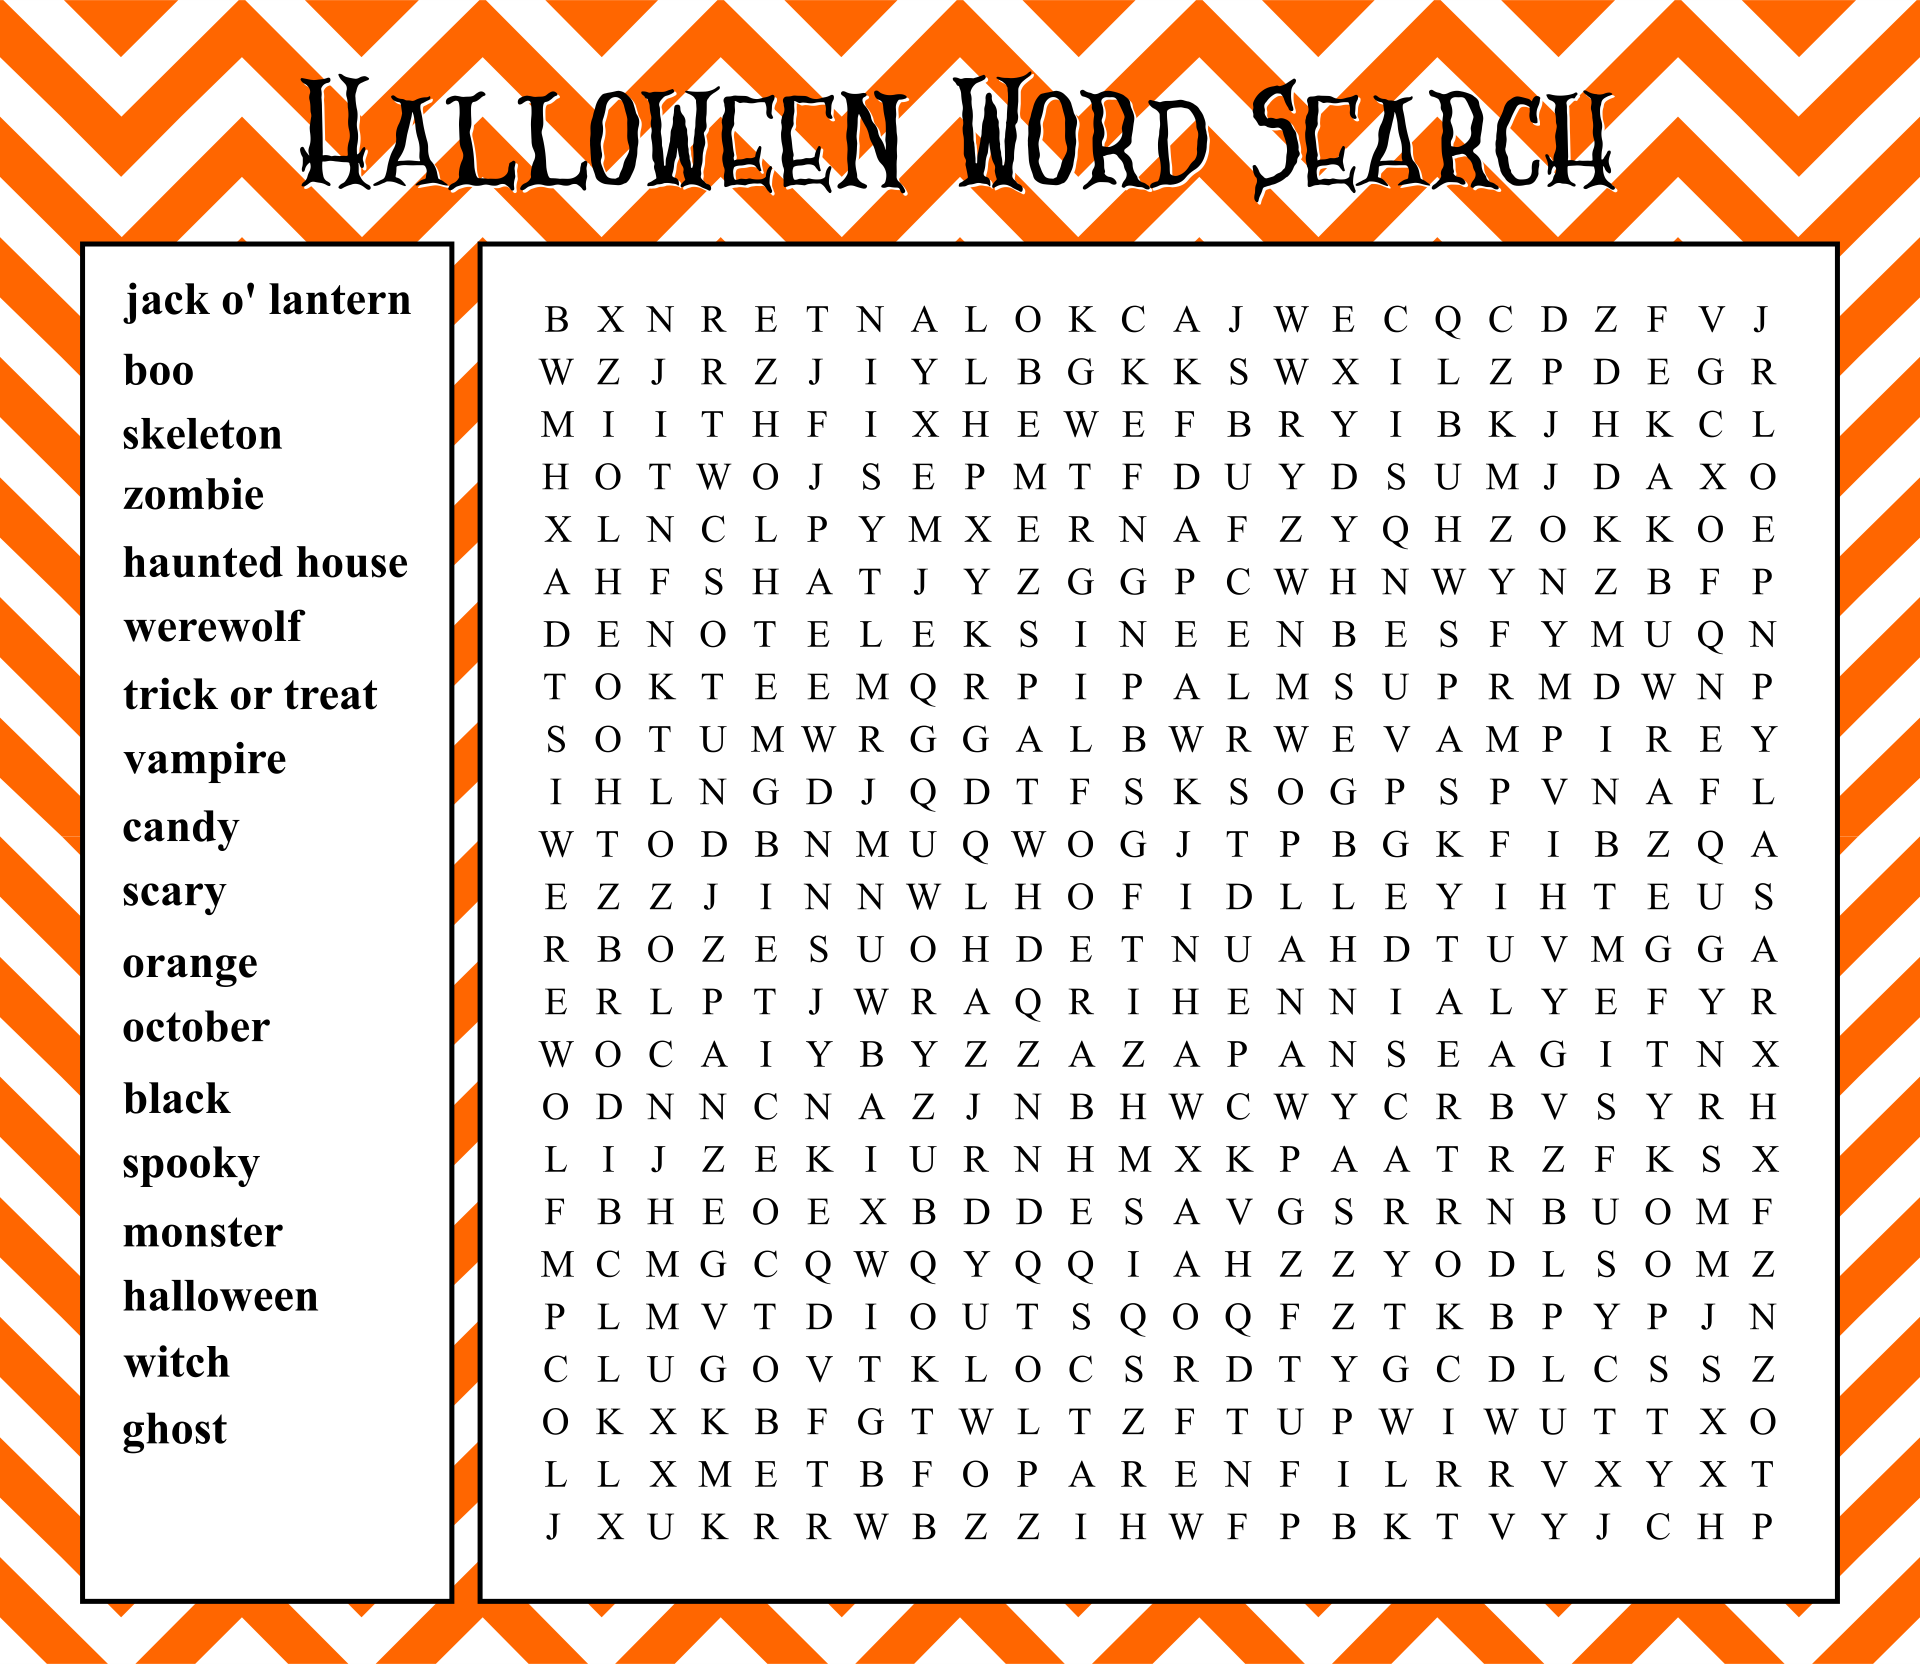 6 Best Images of Halloween Word Search Printable Large - Printable